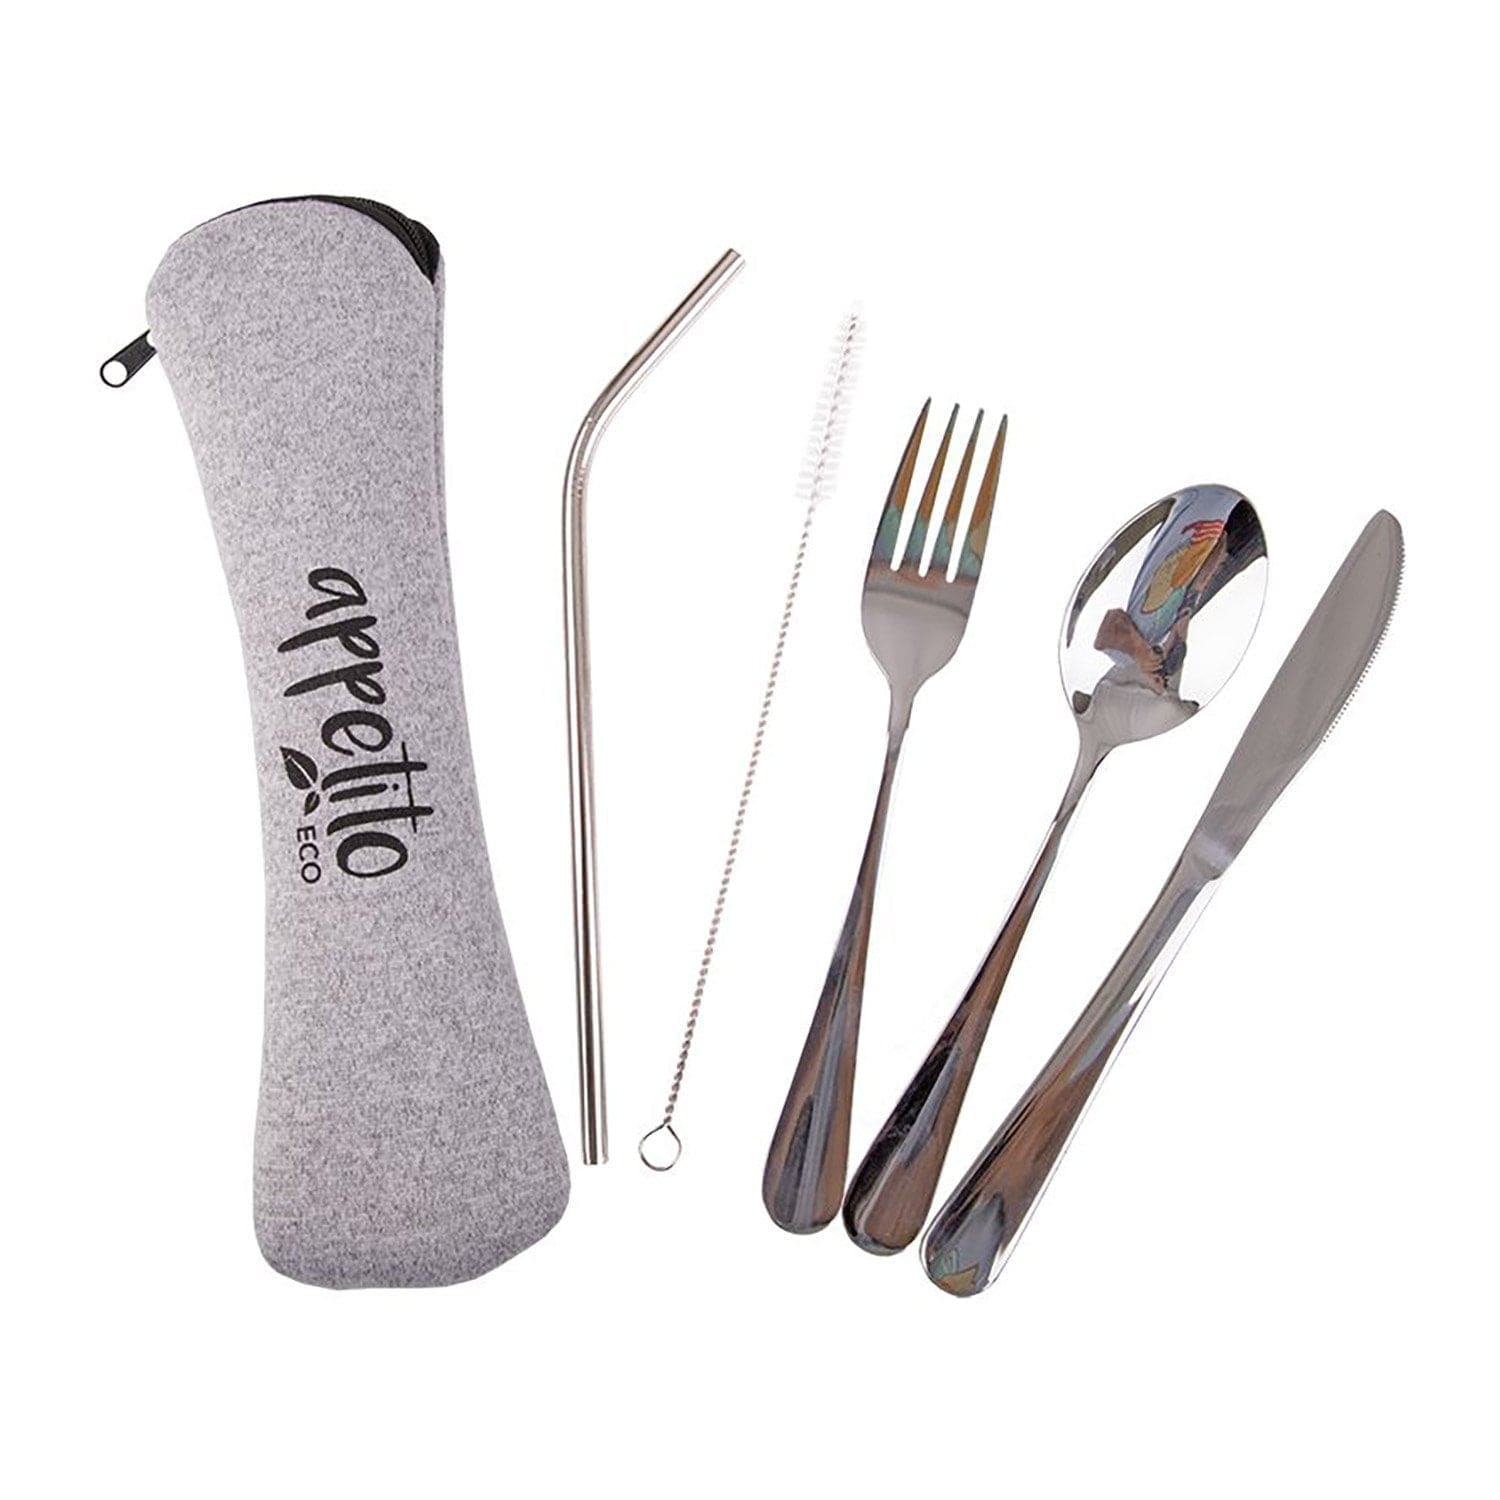 https://cdn.shopify.com/s/files/1/0672/1054/3353/products/appetito-cutlery-appetito-stainless-steel-travellers-5-piece-cutlery-set-38033913872633.jpg?v=1669674073&width=1500